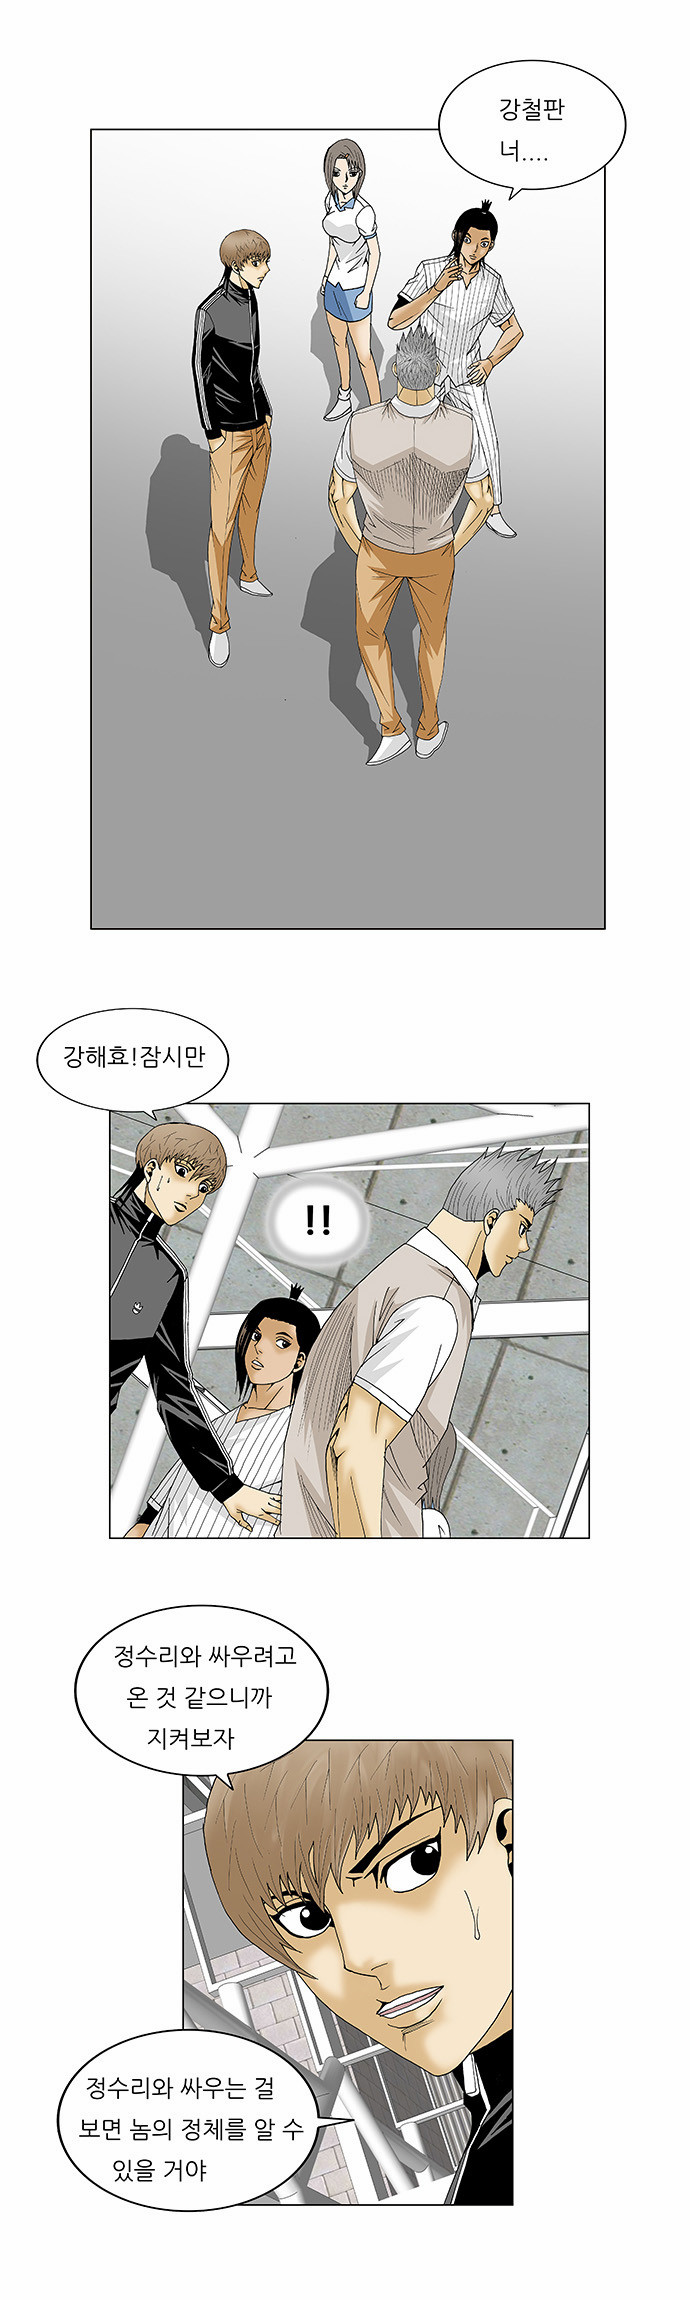 Ultimate Legend - Kang Hae Hyo - Chapter 110 - Page 5